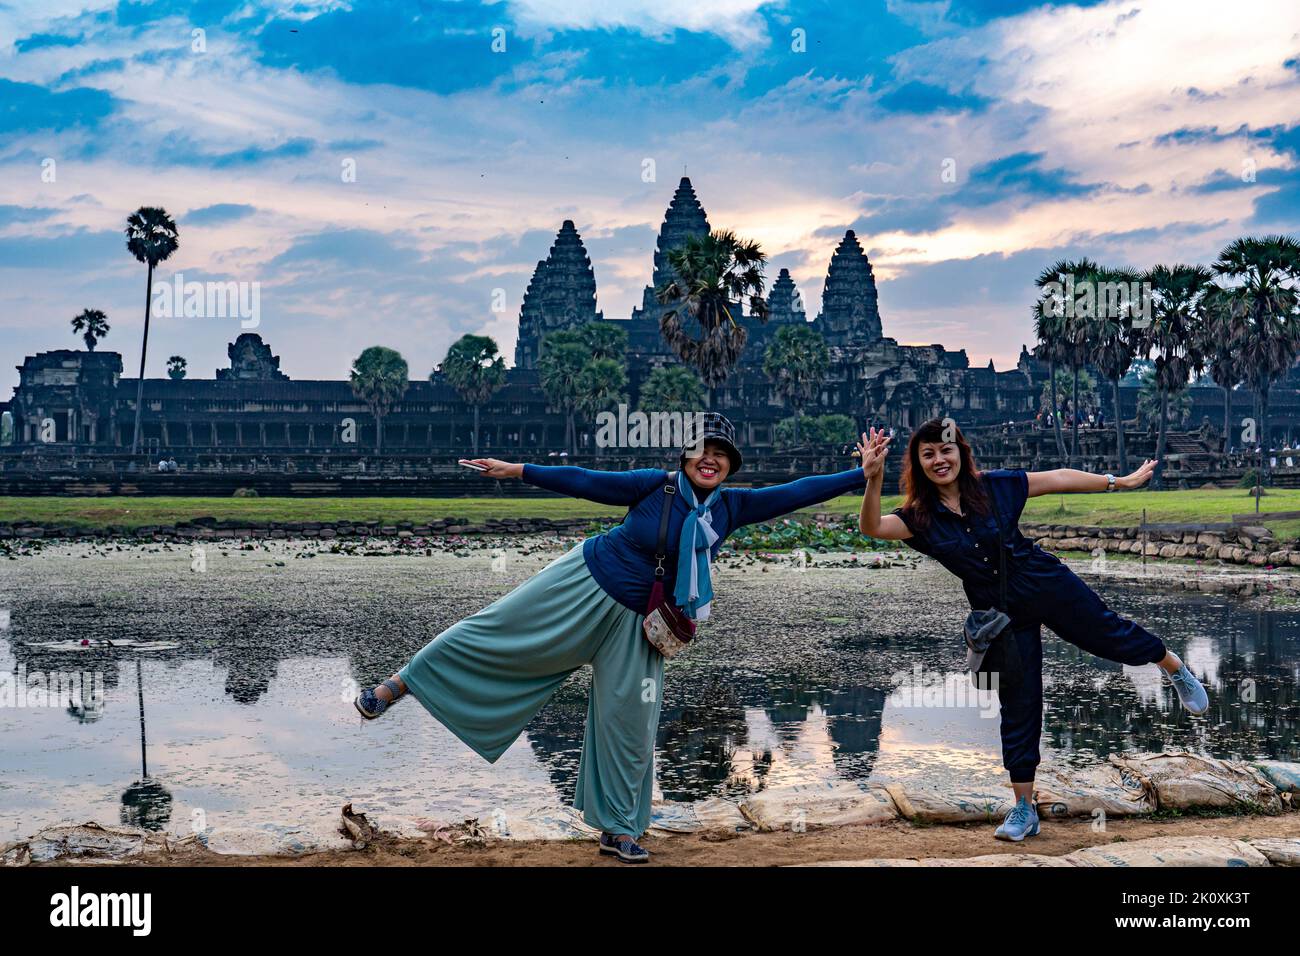 Cambodia. Siem Reap Province. Tourists have their photo taken in front of Angkor Wat (Temple City) and its reflection in the lake at early morning.  A Stock Photo